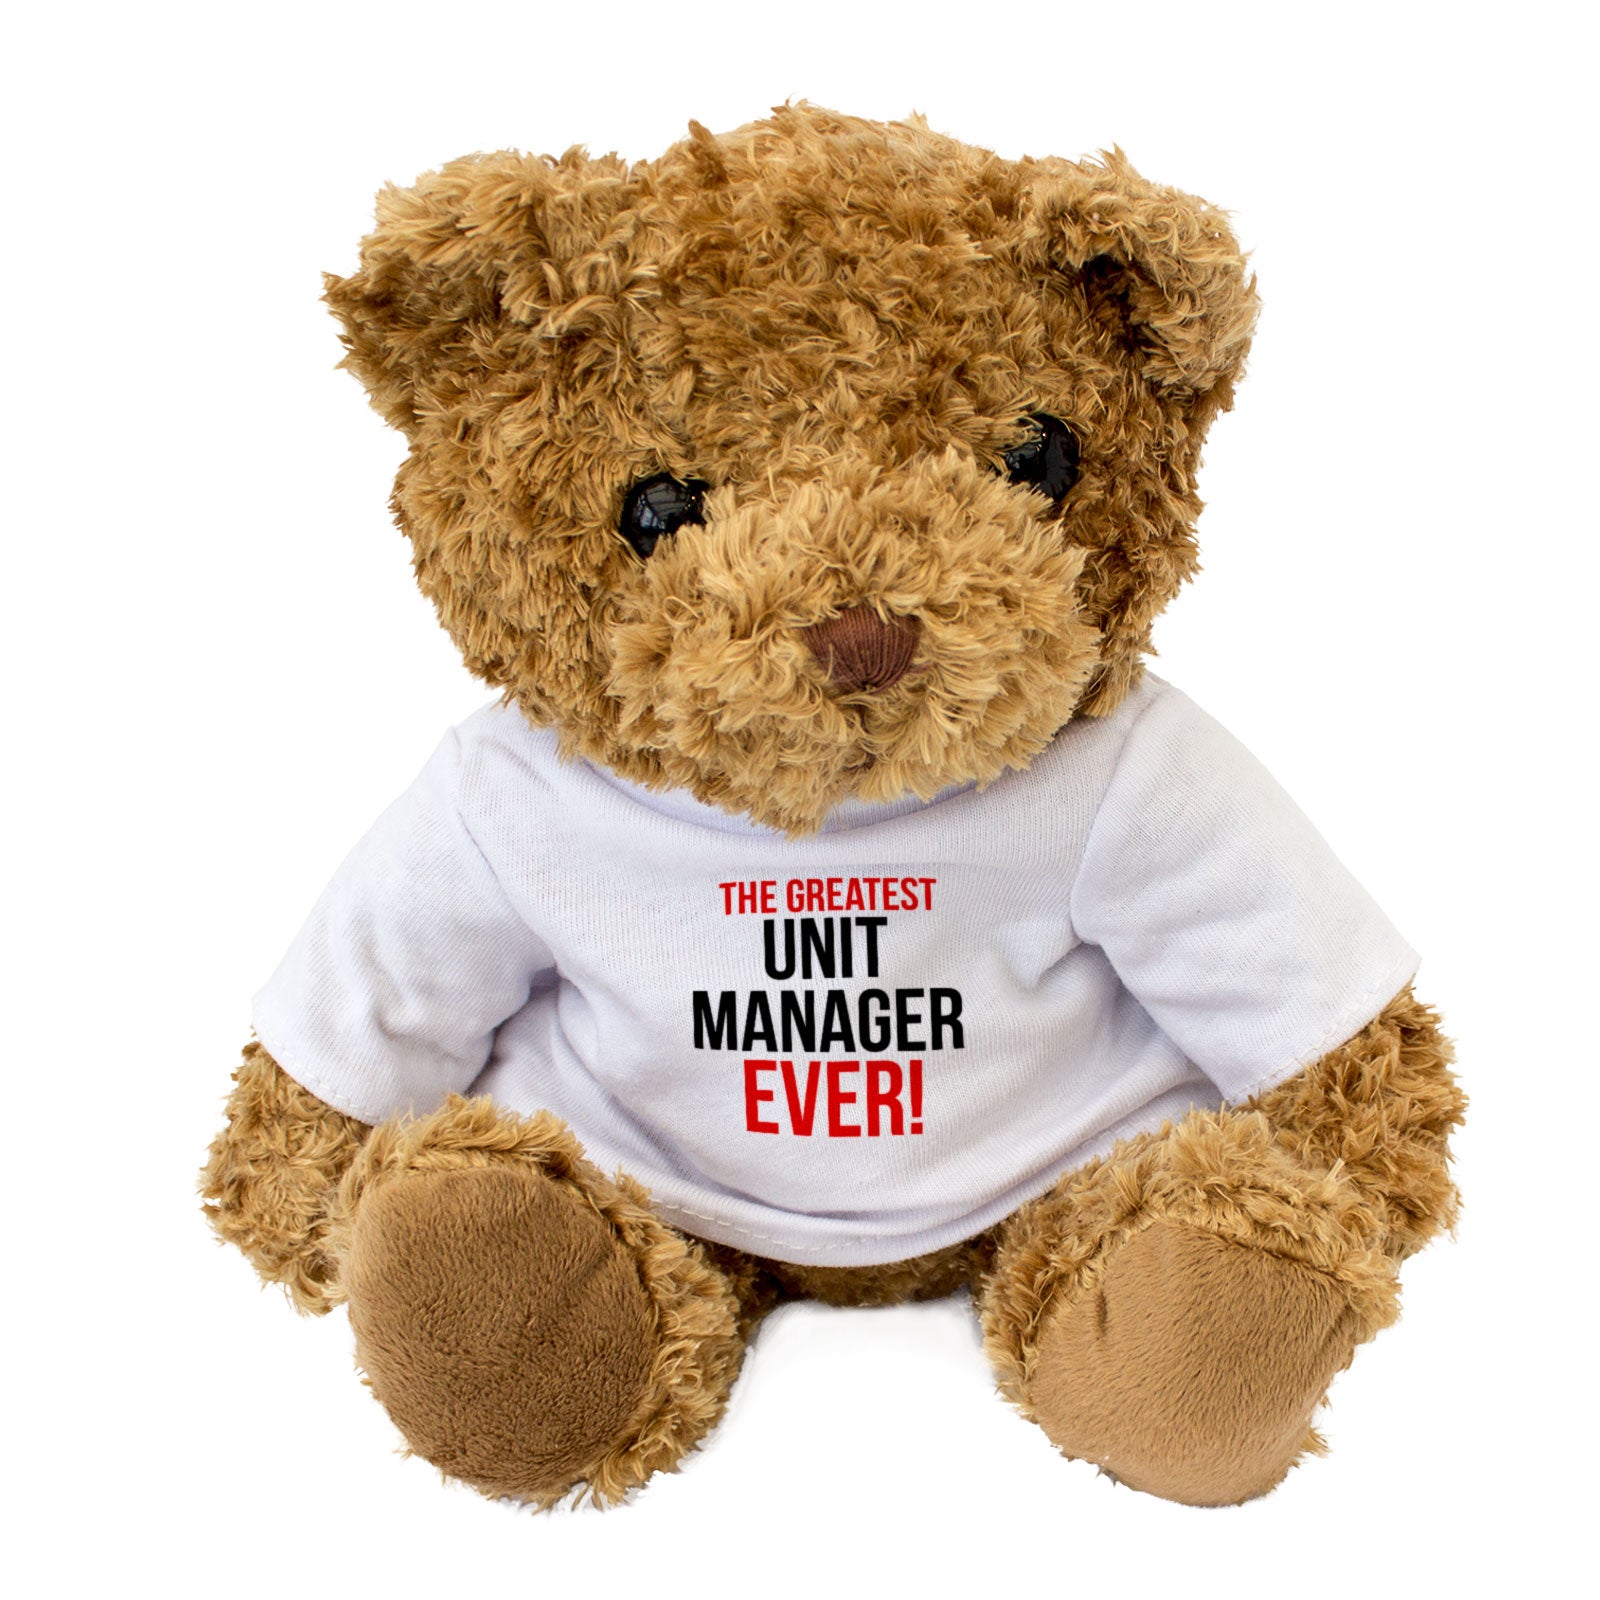 The Greatest Unit Manager Ever - Teddy Bear